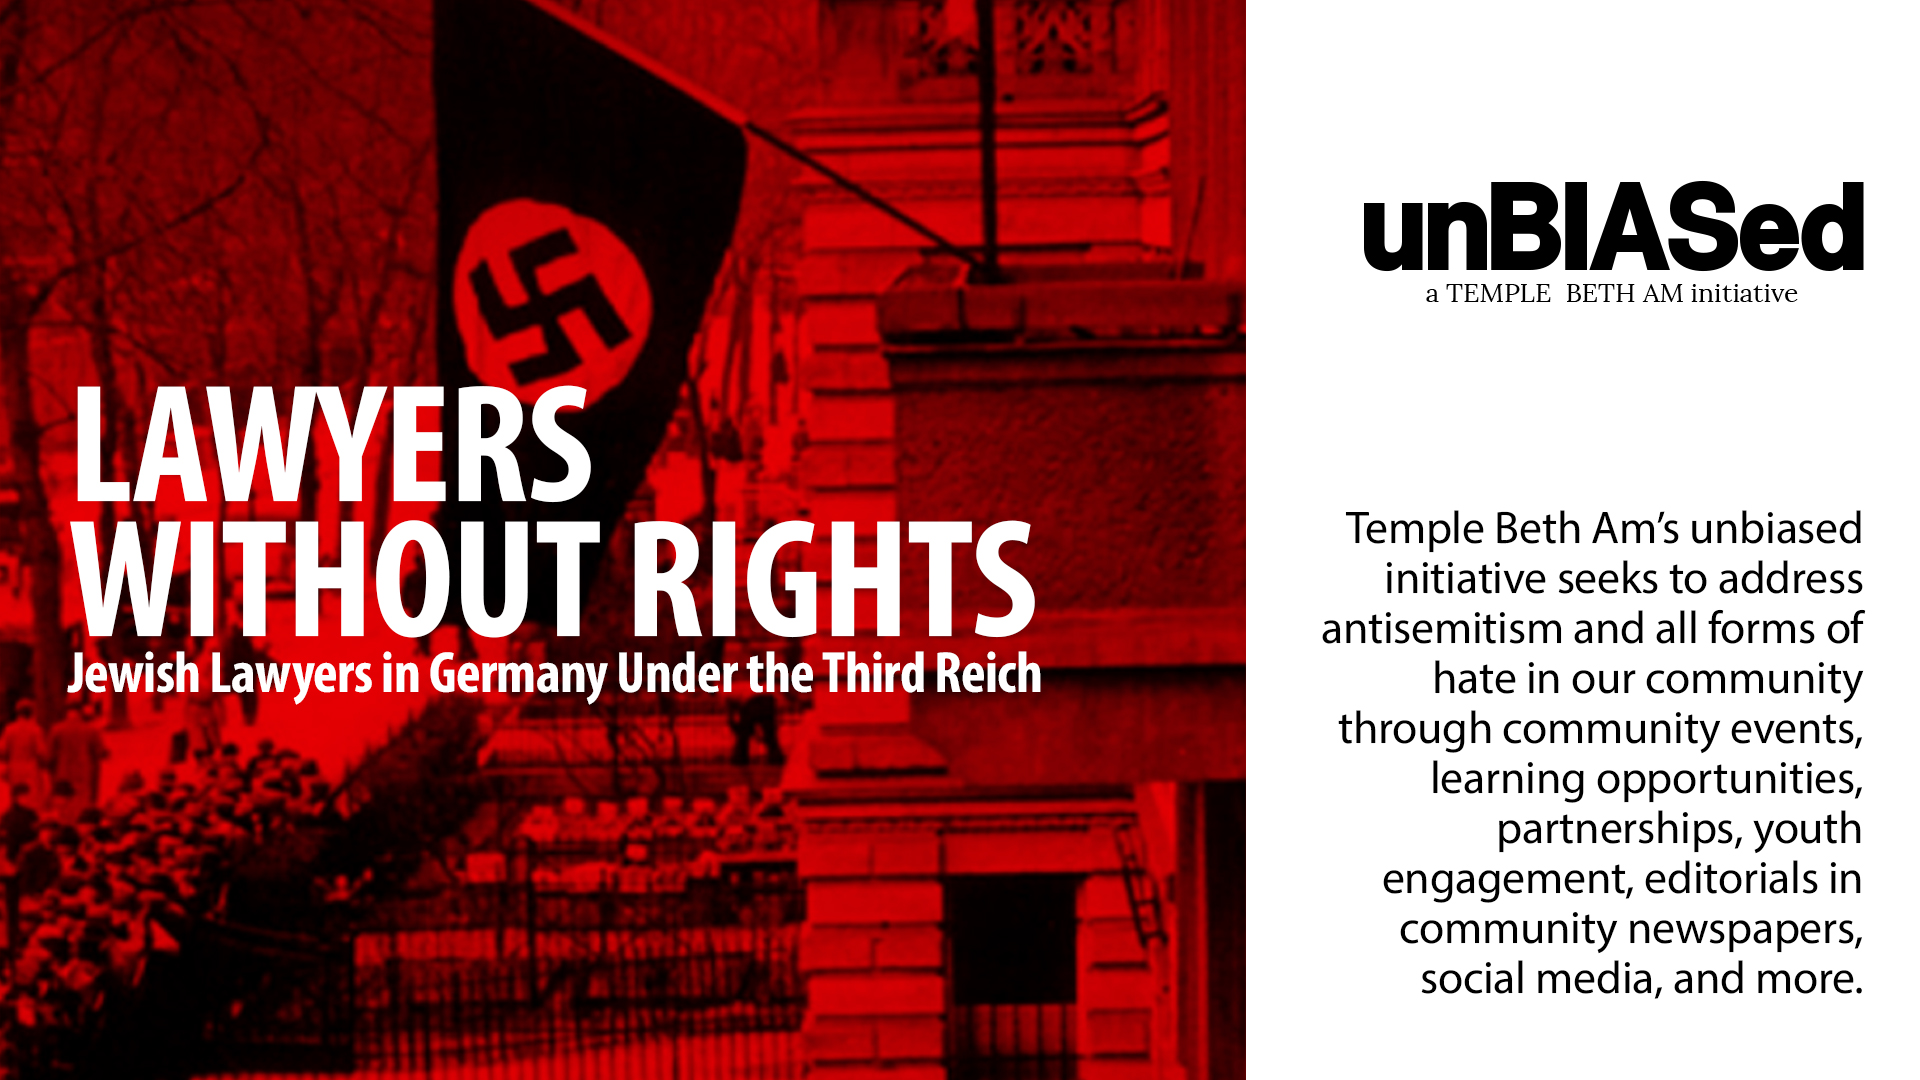 Lawyers Without Rights: Jewish Lawyers in Germany under the Third Reich. Temple Beth Am's unBIASed Initiative seeks to address antisemitism and all forms of hate in our community through events, learning opportunities, partnerships, youth engagement, editorials in community newspapers, social media, and more.